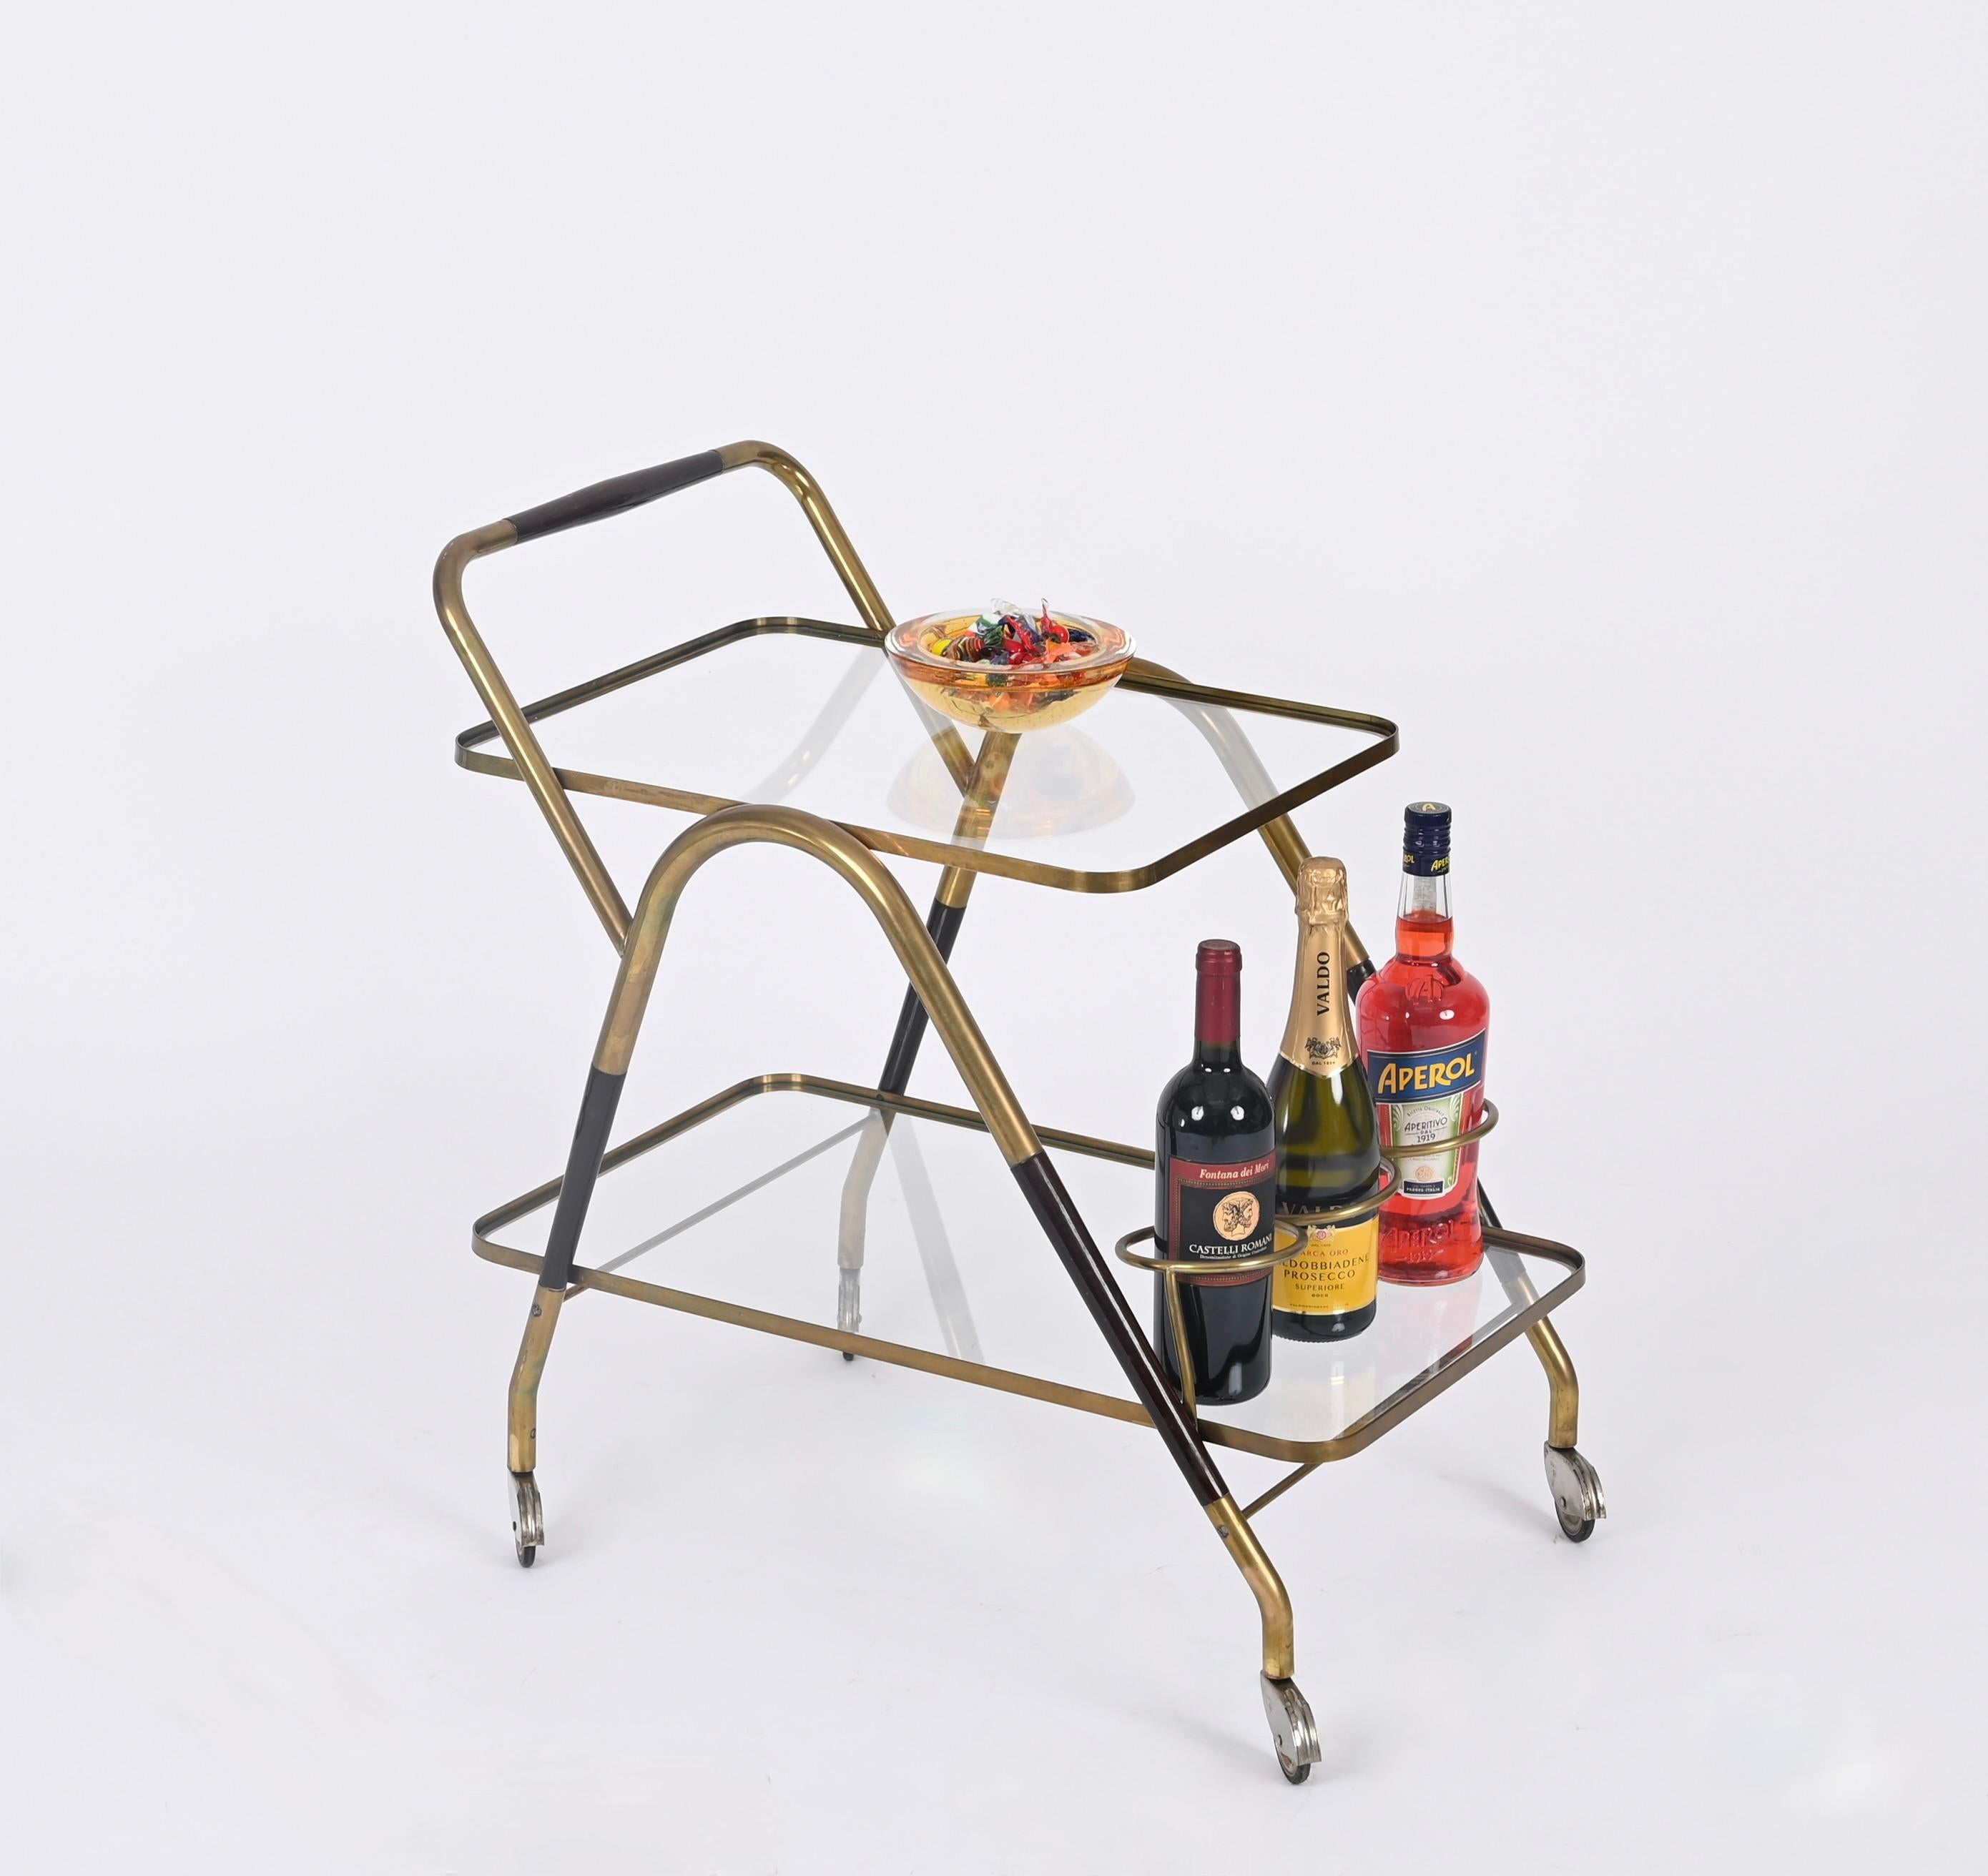 Marvellous Italian serving bar cart in brass and lacqured walnut.  This stunning piece was designed by Cesare Lacca in the 1950s in Italy. 

This stunning cart is in its fully original configuration and in amazing conditions. The sinuous lines of